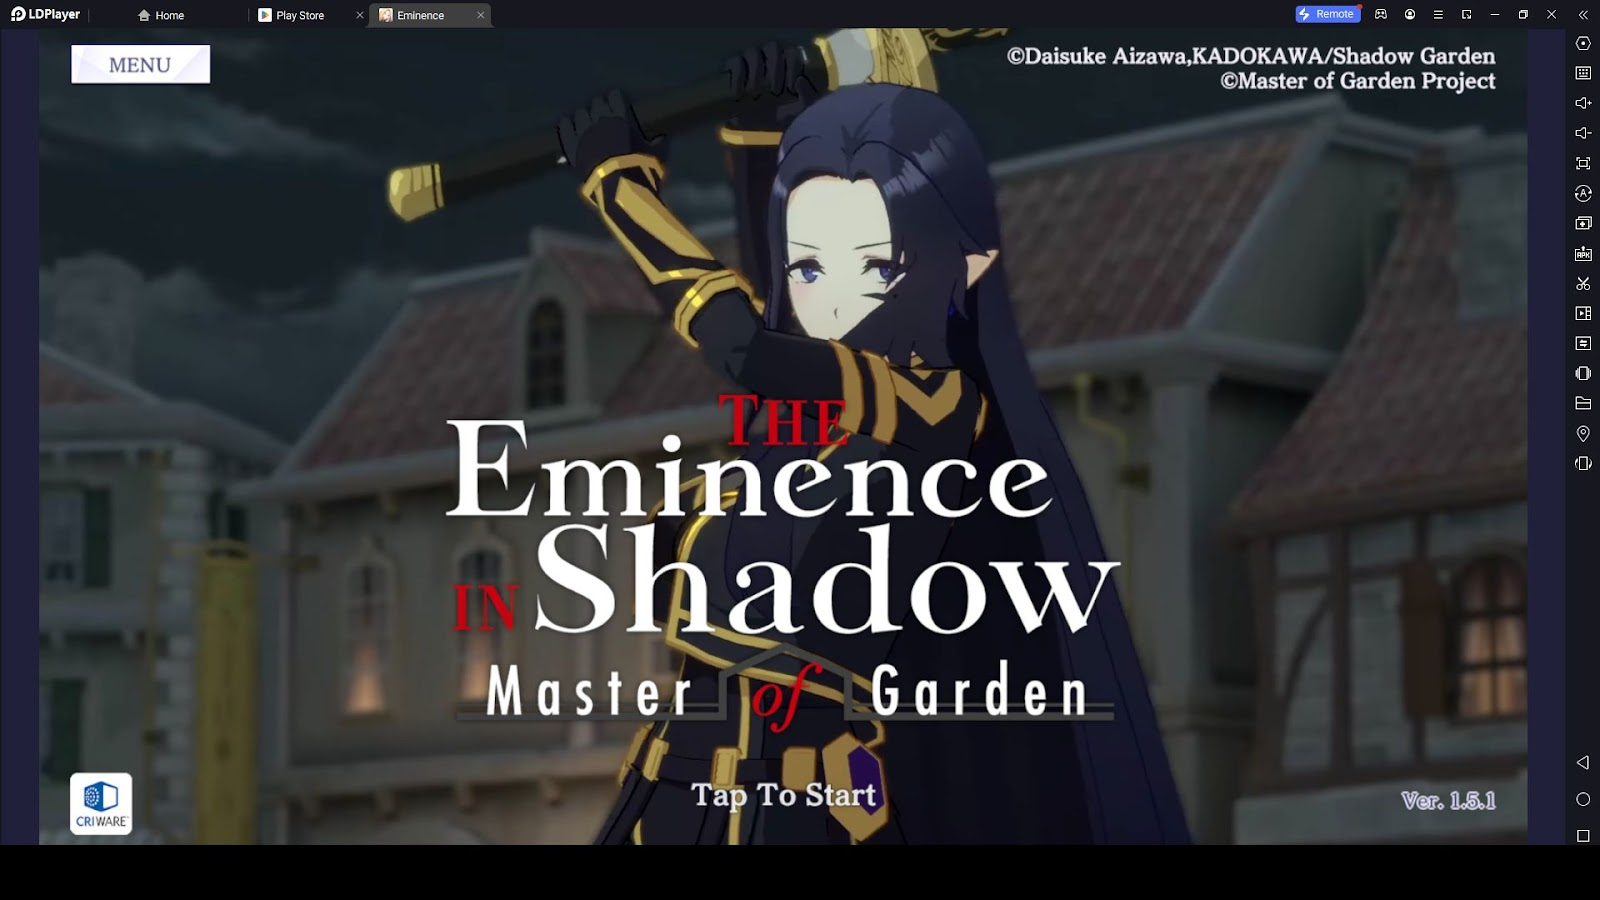 Eminence in Shadow codes